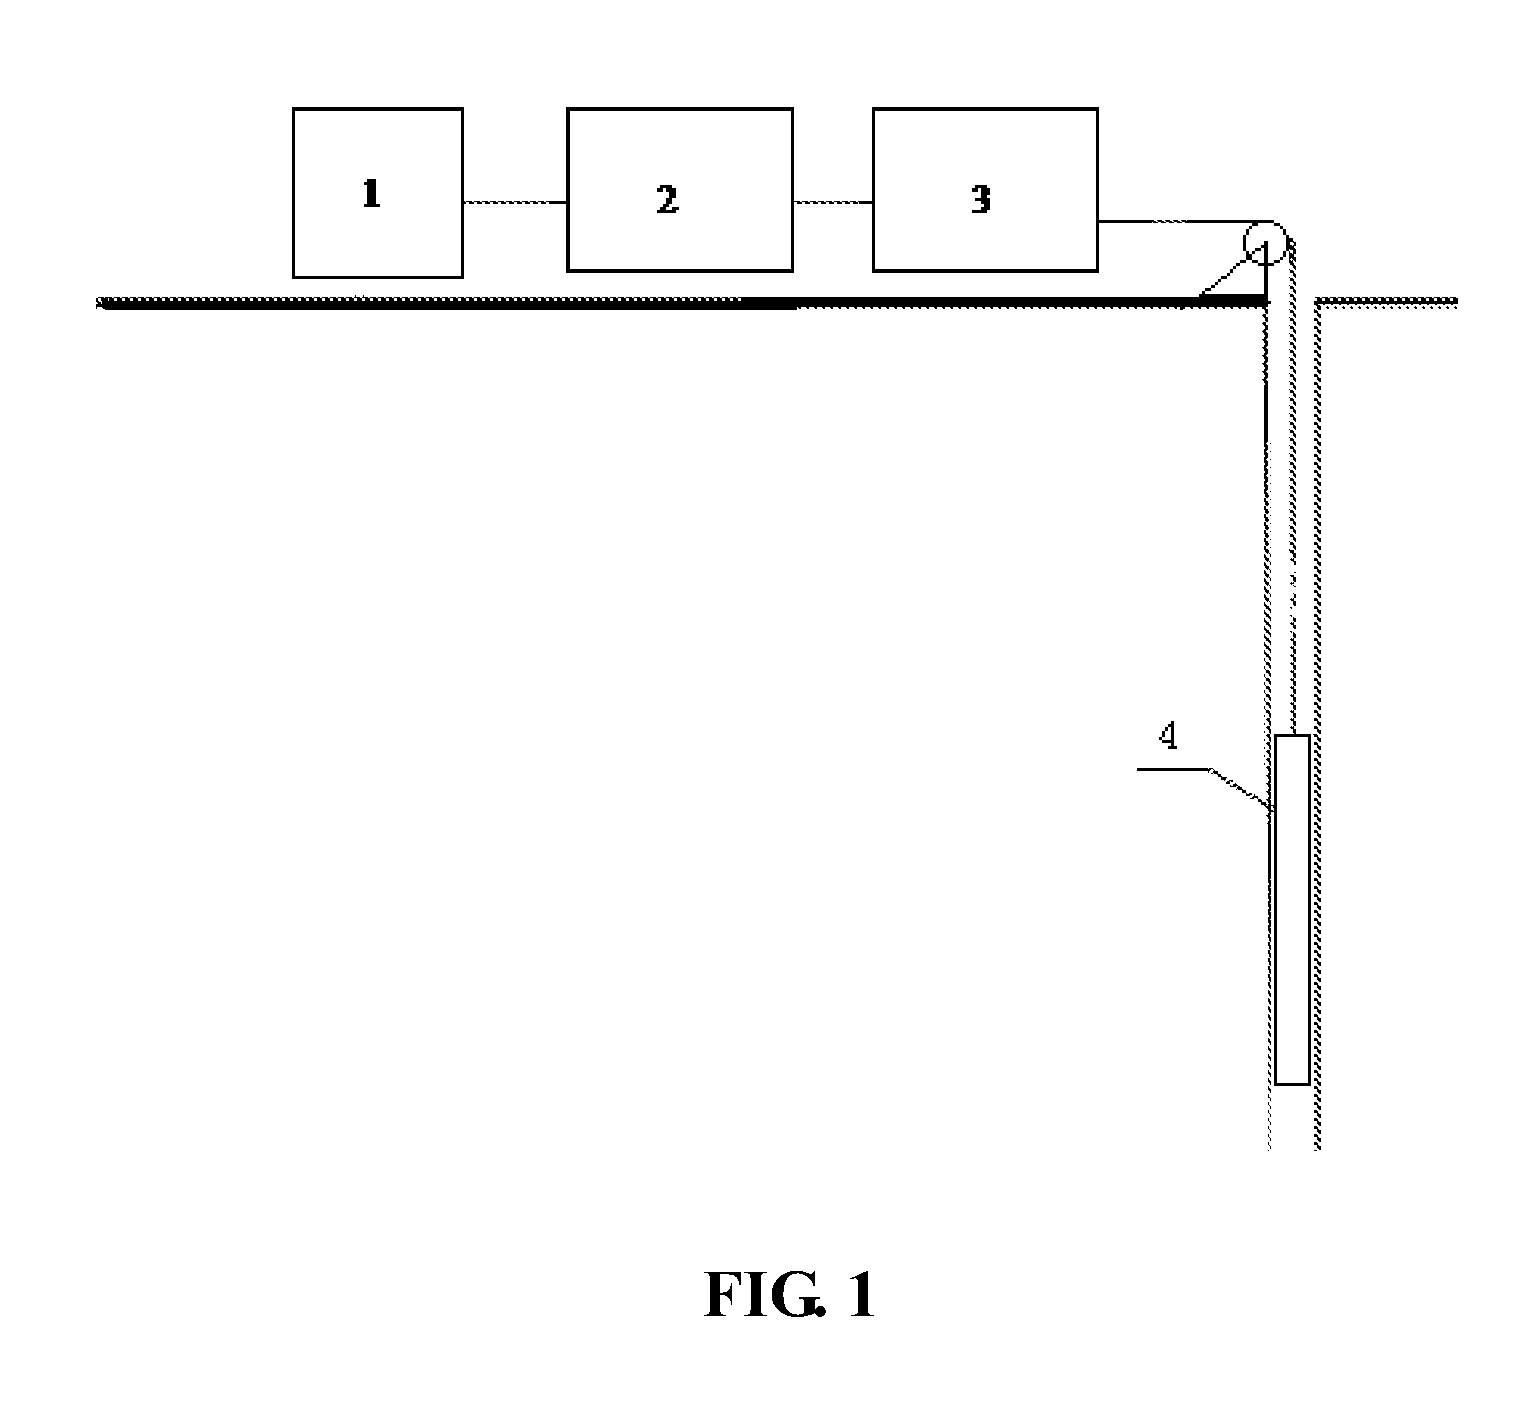 Method for detecting formation resistivity outside of metal casing using time-domain electromagnetic pulse in well